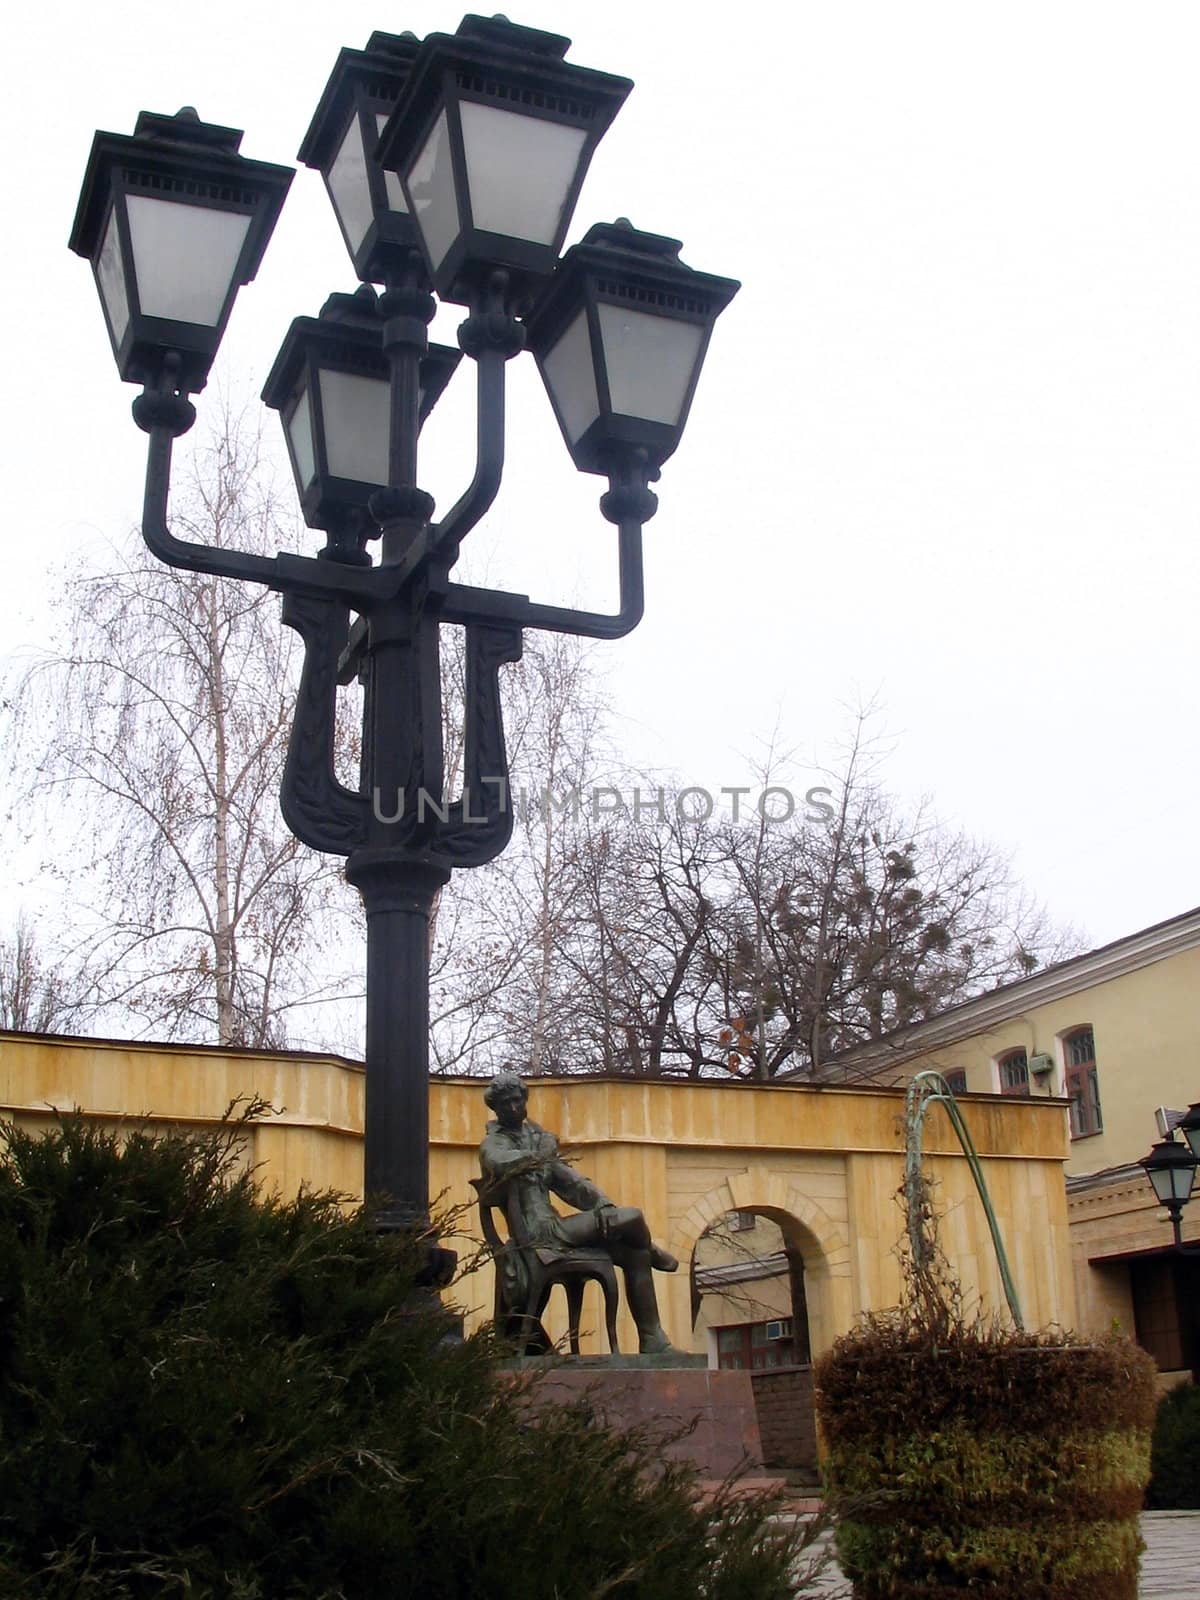 The Old-time torch in Pushkin-garden